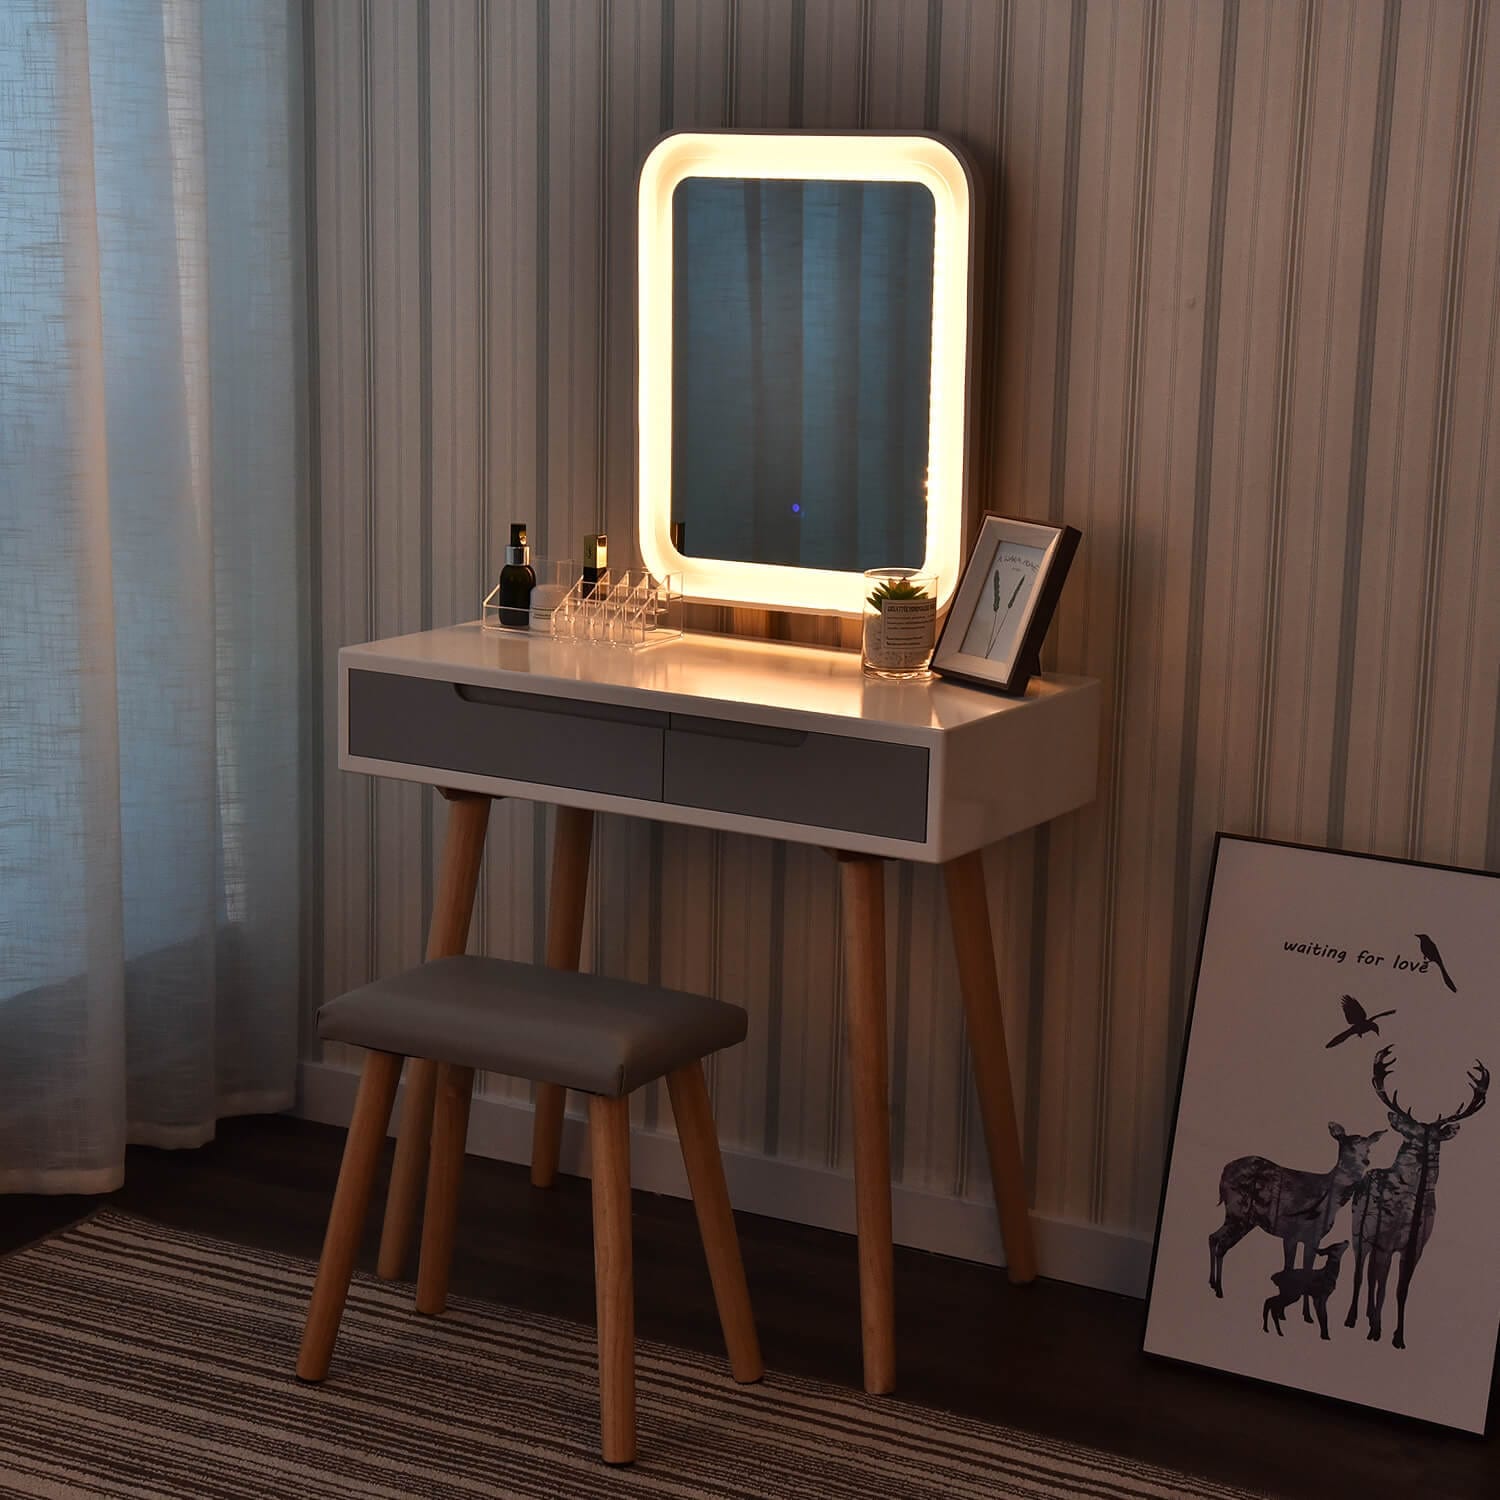 Elecwish makeup dressing table set with square mirror which is in open light status